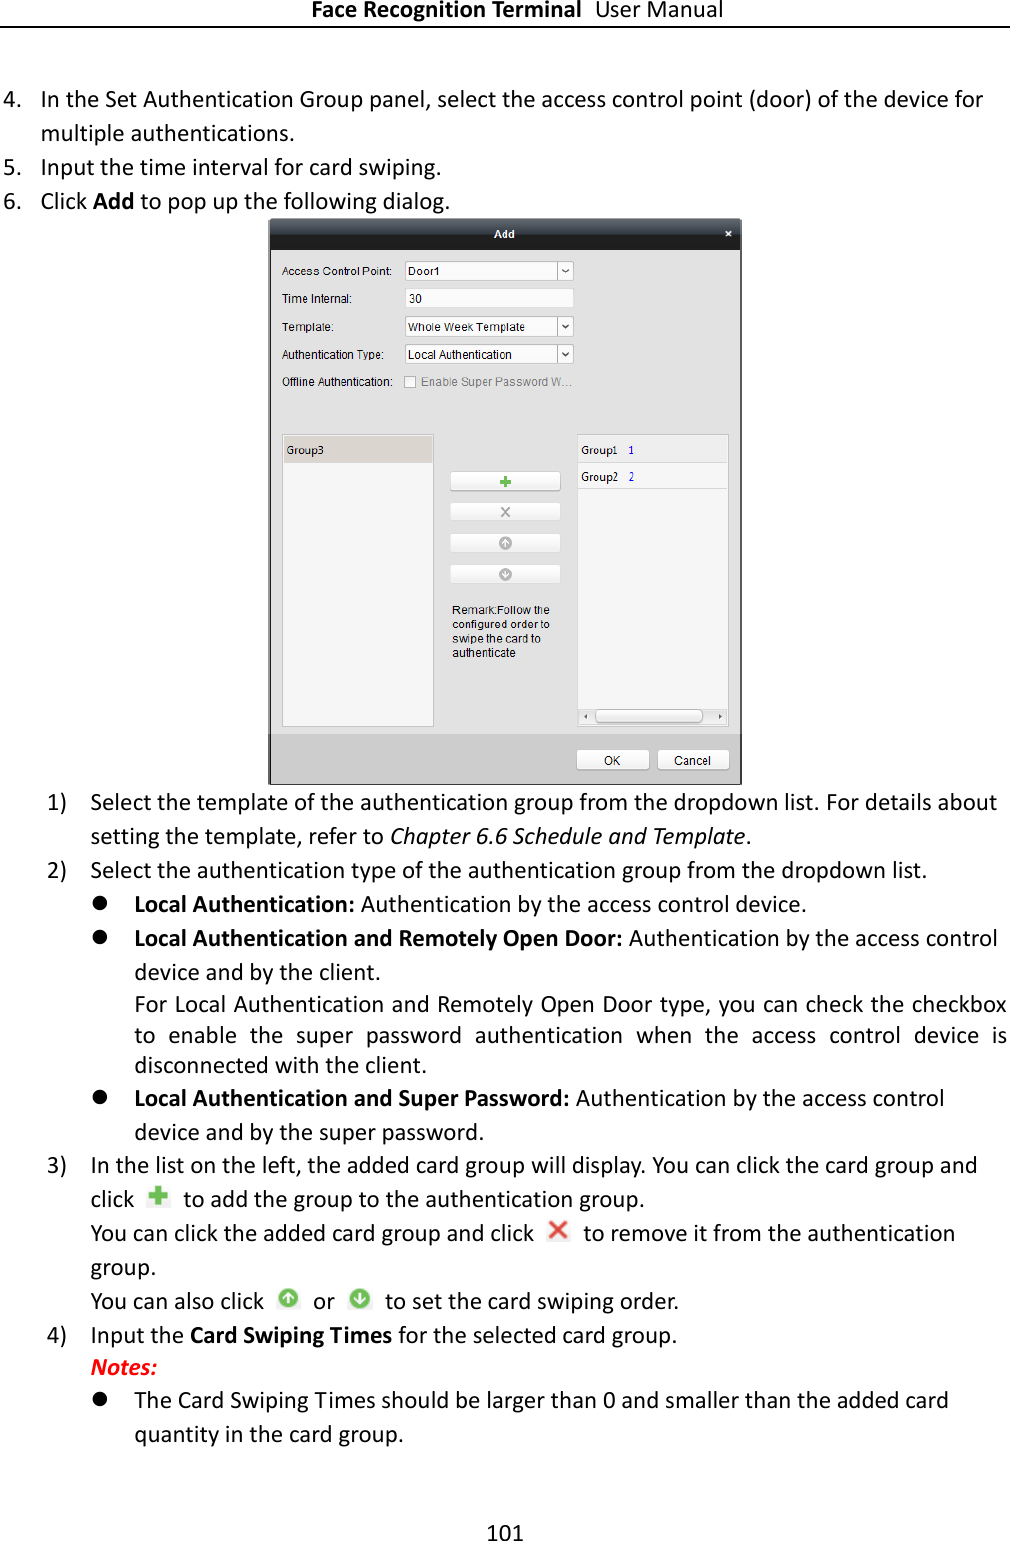 Face Recognition Terminal User Manual 101  4. In the Set Authentication Group panel, select the access control point (door) of the device for multiple authentications. 5. Input the time interval for card swiping. 6. Click Add to pop up the following dialog.  1) Select the template of the authentication group from the dropdown list. For details about setting the template, refer to Chapter 6.6 Schedule and Template. 2) Select the authentication type of the authentication group from the dropdown list.    Local Authentication: Authentication by the access control device.  Local Authentication and Remotely Open Door: Authentication by the access control device and by the client. For Local Authentication and Remotely Open Door type, you can check the checkbox to  enable  the  super  password  authentication  when  the  access  control  device  is disconnected with the client.  Local Authentication and Super Password: Authentication by the access control device and by the super password. 3) In the list on the left, the added card group will display. You can click the card group and click    to add the group to the authentication group. You can click the added card group and click    to remove it from the authentication group. You can also click    or    to set the card swiping order. 4) Input the Card Swiping Times for the selected card group. Notes:    The Card Swiping Times should be larger than 0 and smaller than the added card quantity in the card group.   